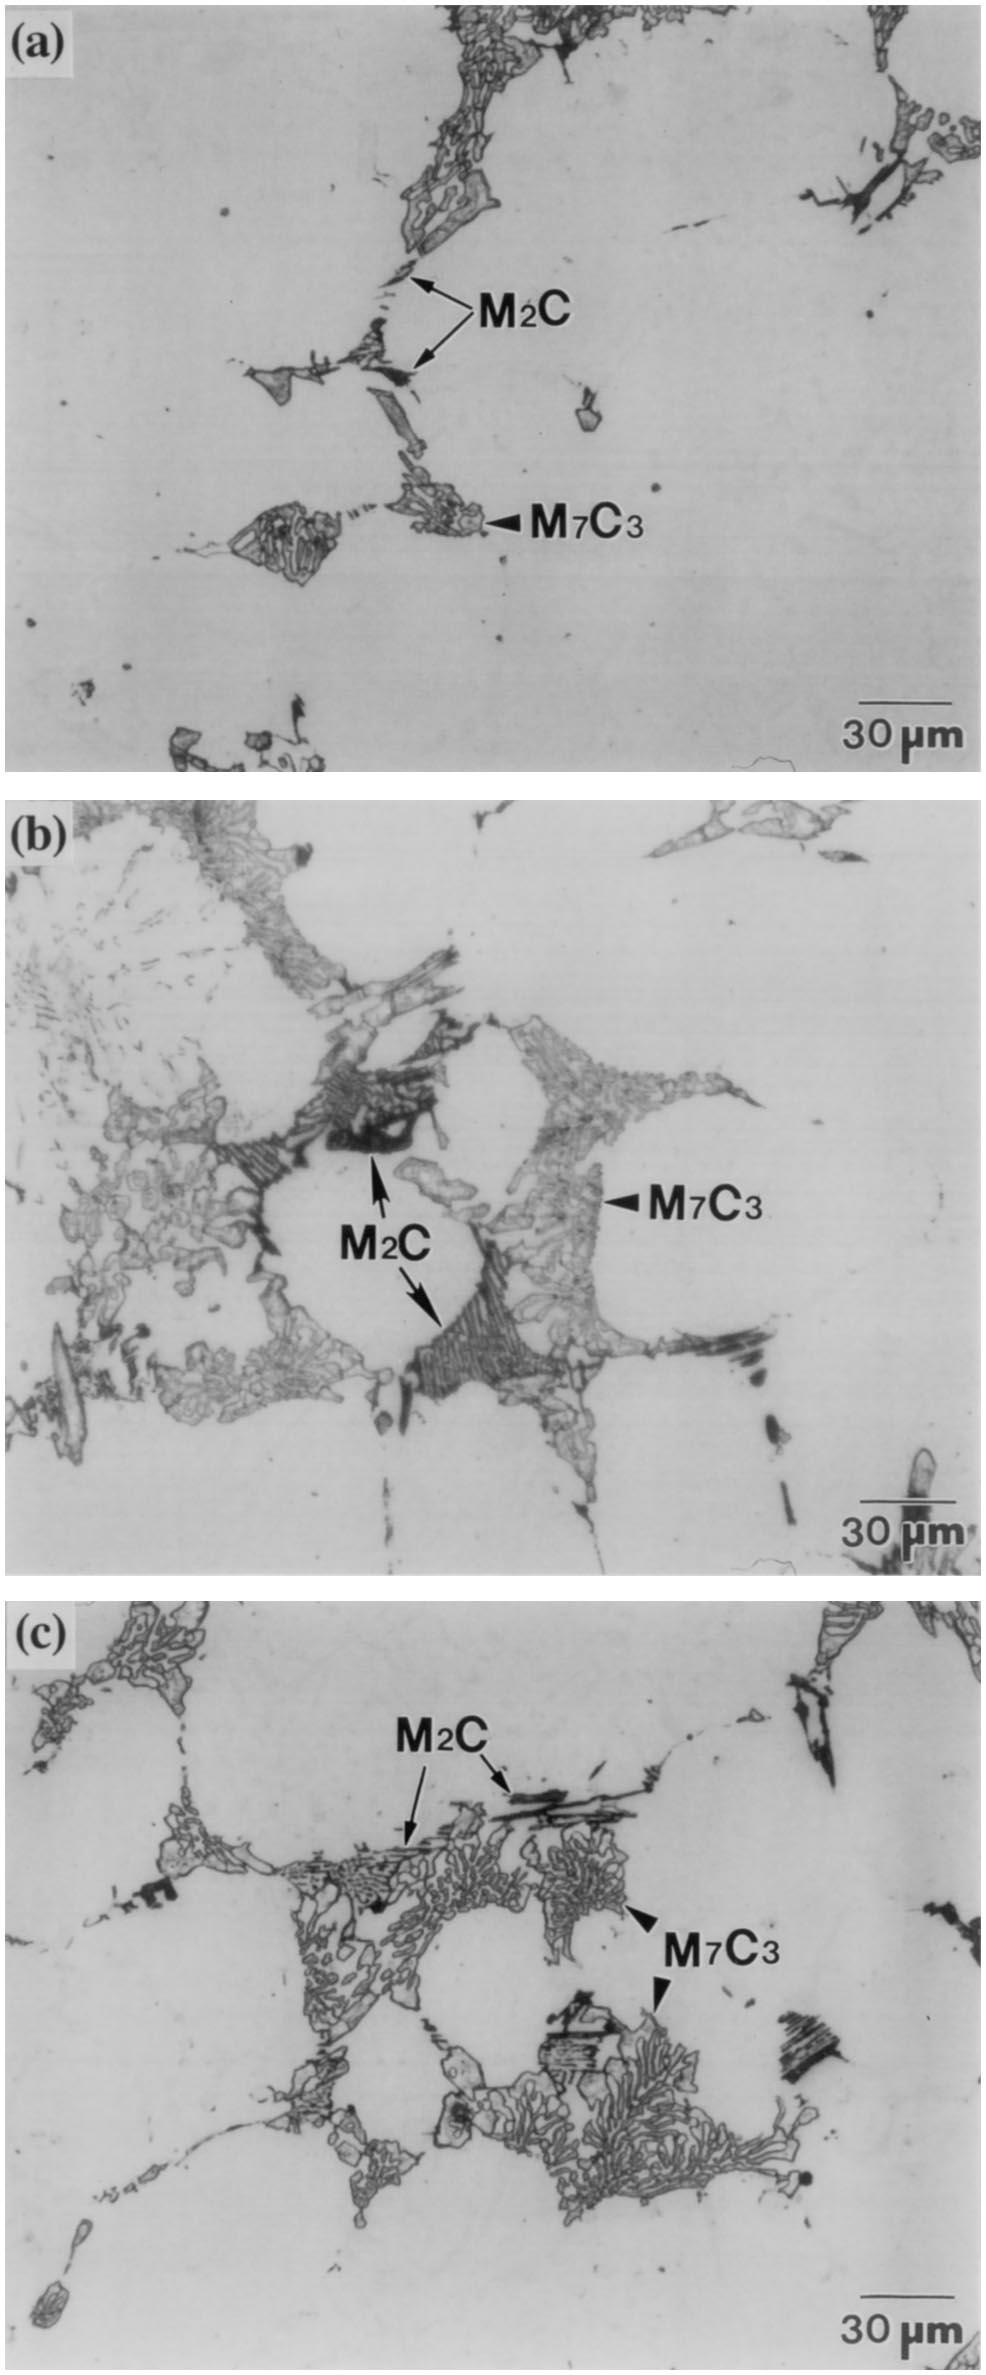 286 K.C. Hwang et al. / Materials Science and Engineering A254 (1998) 282 295 Fig. 3. (a) through (f) Optical micrographs of the shell region of six as-cast HSS rolls. Etched by Murakami etchant.